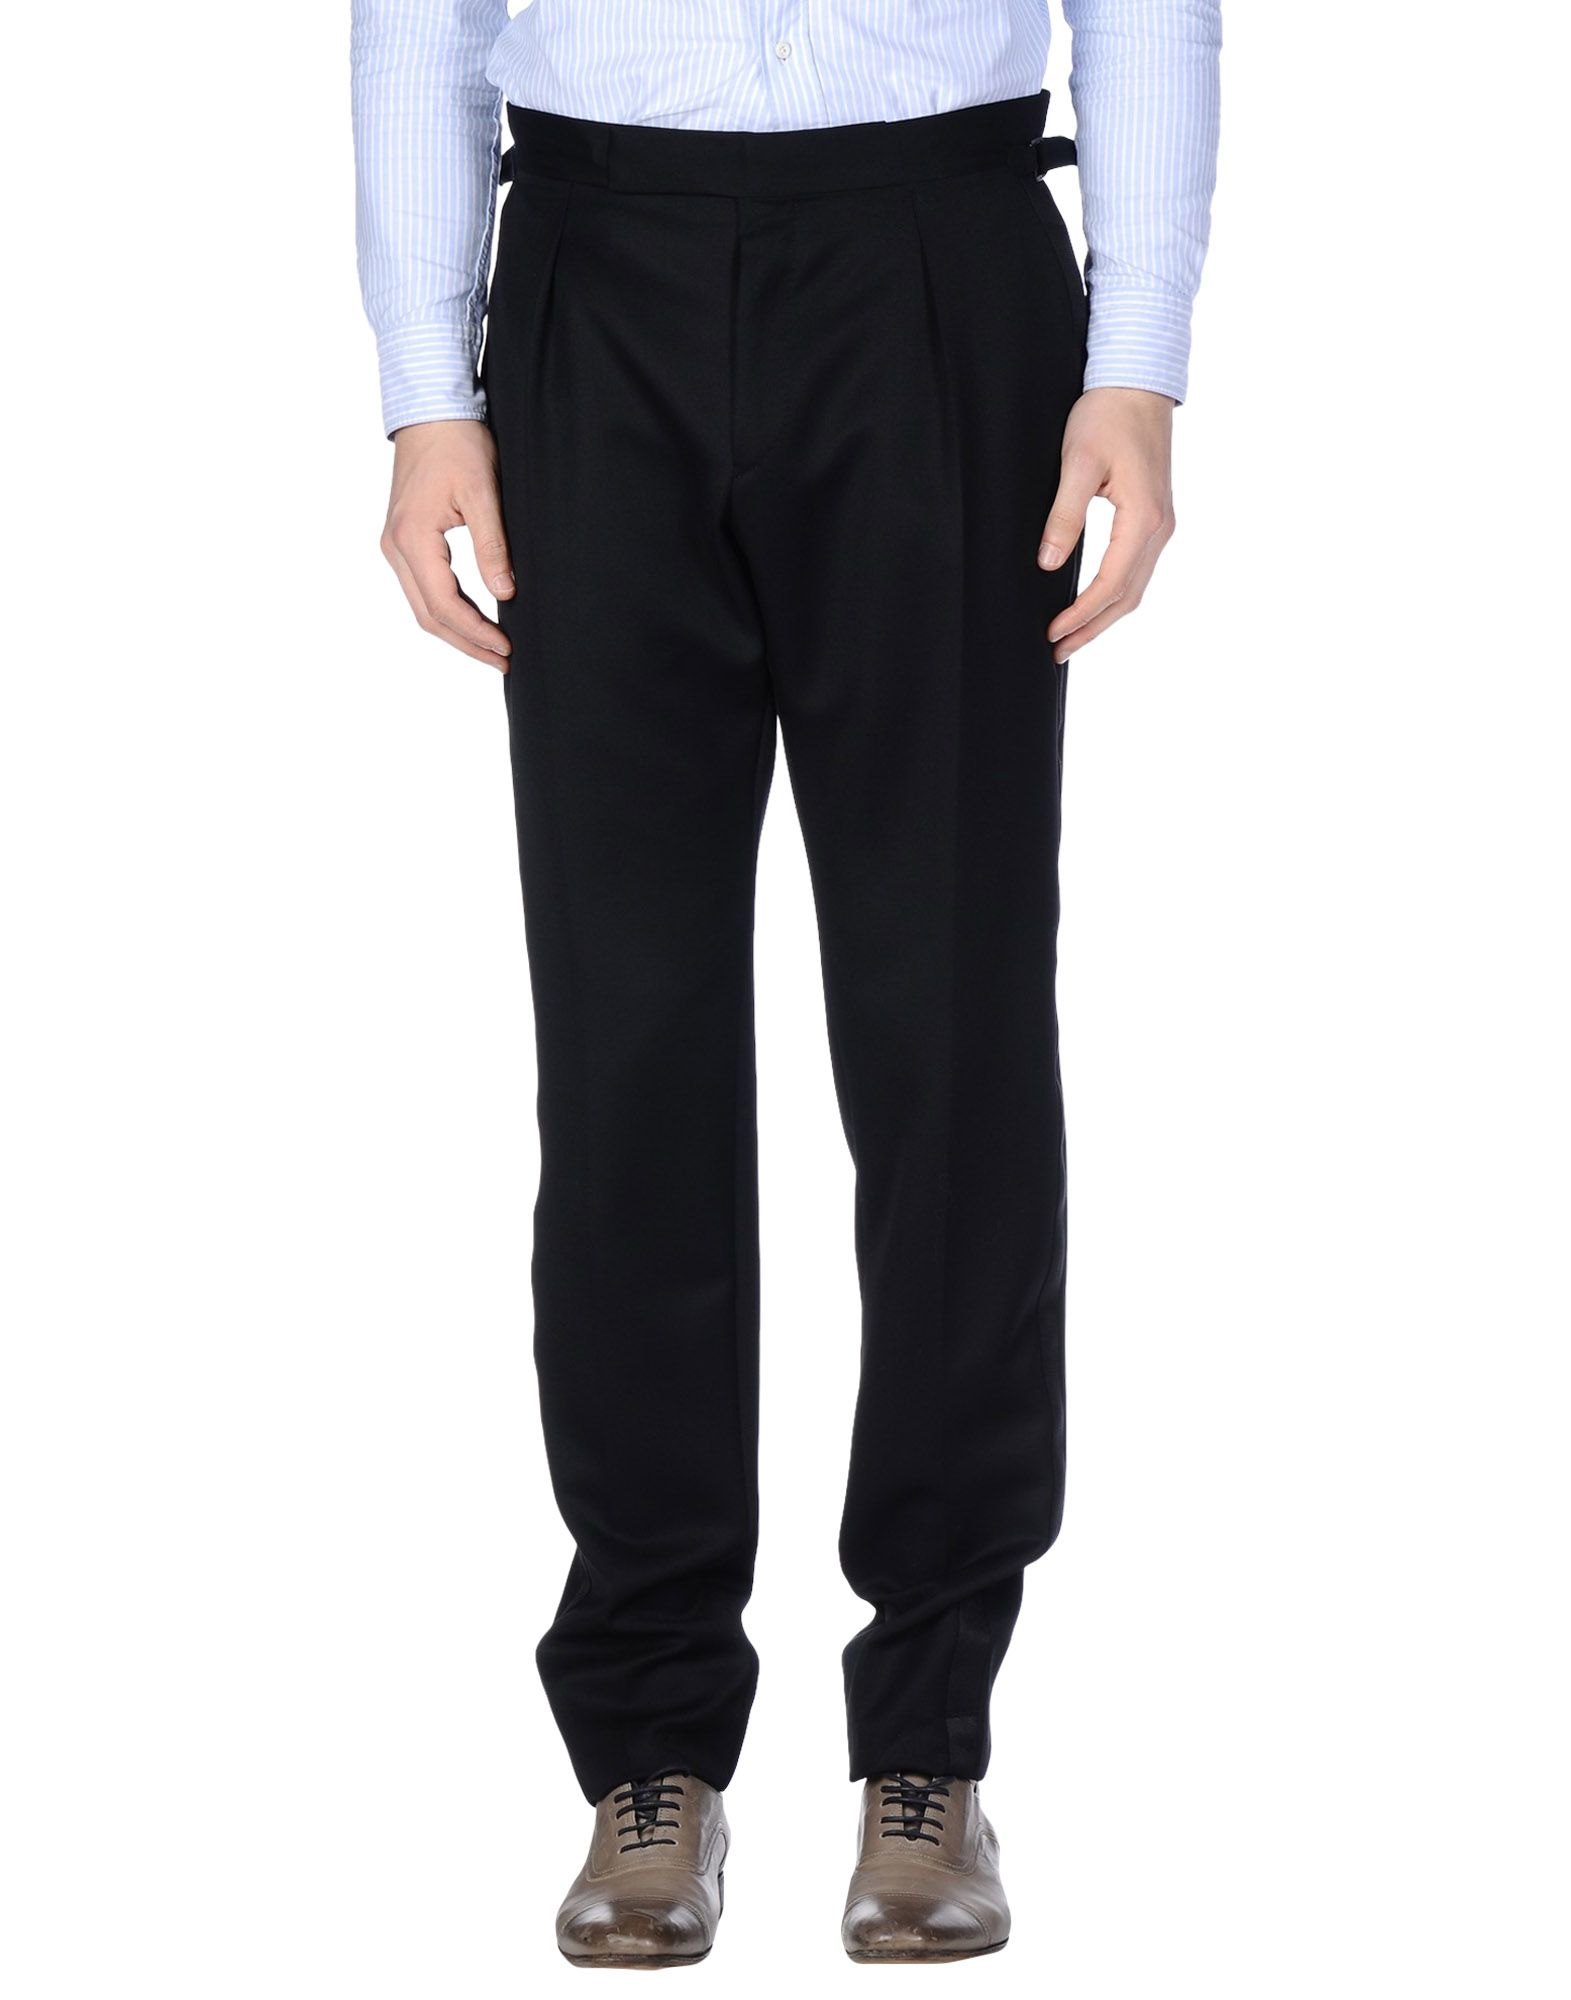 Lyst - Tom Ford Casual Trouser in Black for Men